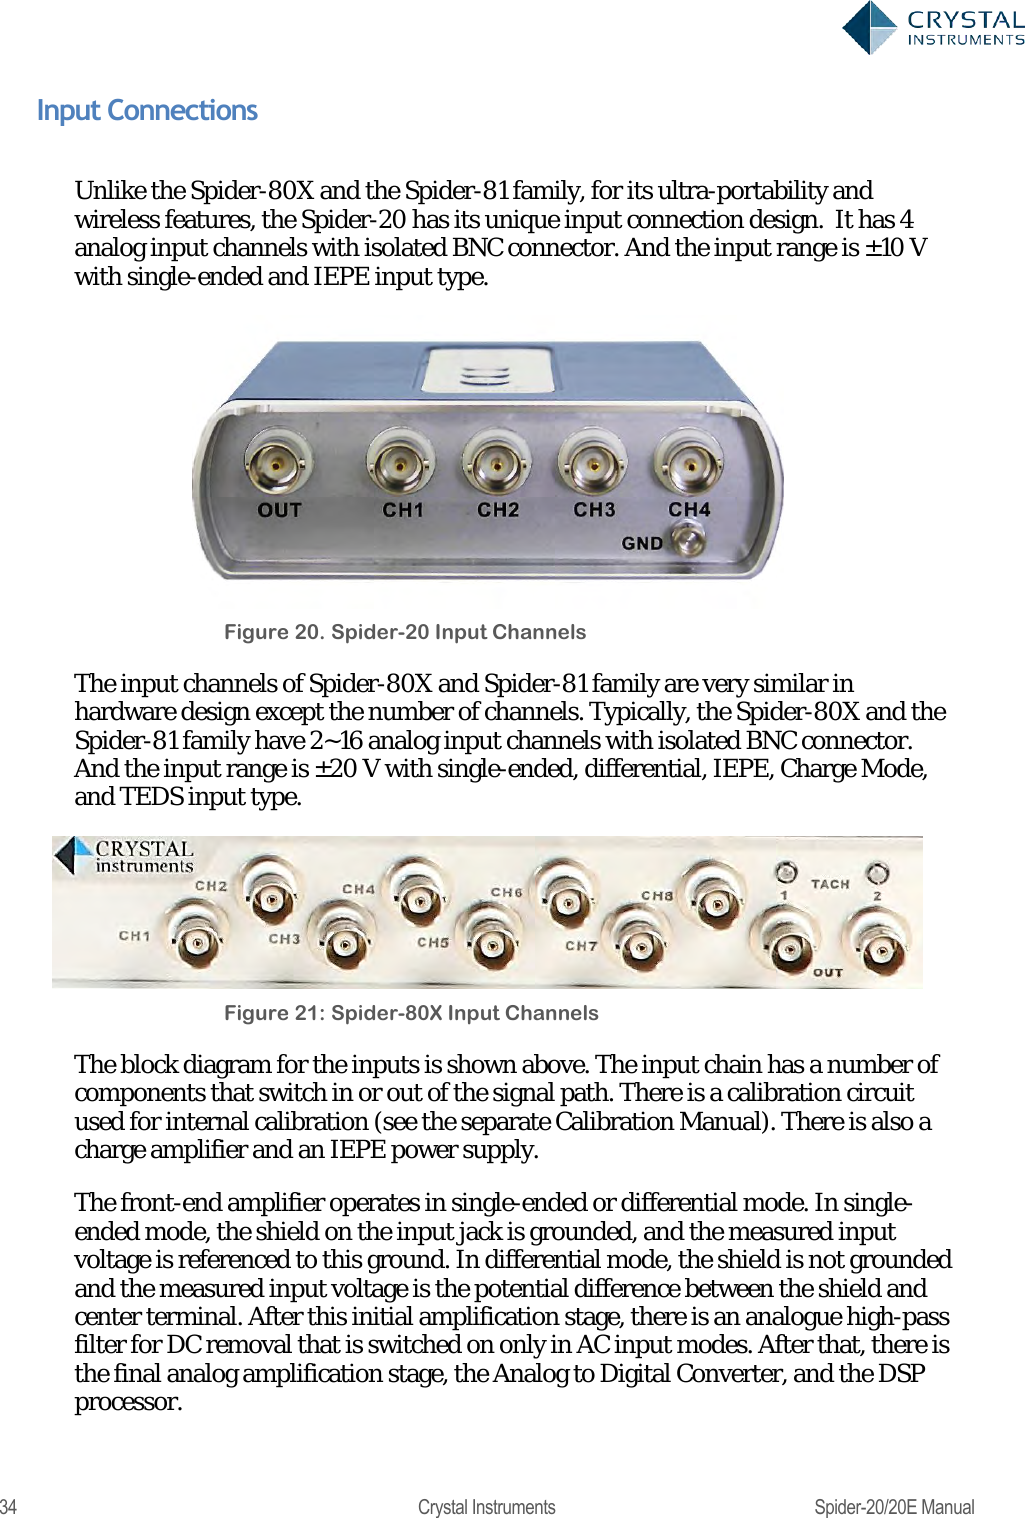  34  Crystal Instruments  Spider-20/20E Manual Input Connections  Unlike the Spider-80X and the Spider-81 family, for its ultra-portability and wireless features, the Spider-20 has its unique input connection design.  It has 4 analog input channels with isolated BNC connector. And the input range is ±10 V with single-ended and IEPE input type.  Figure 20. Spider-20 Input Channels The input channels of Spider-80X and Spider-81 family are very similar in hardware design except the number of channels. Typically, the Spider-80X and the Spider-81 family have 2~16 analog input channels with isolated BNC connector. And the input range is ±2 0 V with single-ended, differential, IEPE, Charge Mode, and TEDS input type.  Figure 21: Spider-80X Input Channels The block diagram for the inputs is shown above. The input chain has a number of components that switch in or out of the signal path. There is a calibration circuit used for internal calibration (see the separate Calibration Manual). There is also a charge amplifier and an IEPE power supply.  The front-end amplifier operates in single-ended or differential mode. In single-ended mode, the shield on the input jack is grounded, and the measured input voltage is referenced to this ground. In differential mode, the shield is not grounded and the measured input voltage is the potential difference between the shield and center terminal. After this initial amplification stage, there is an analogue high-pass filter for DC removal that is switched on only in AC input modes. After that, there is the final analog amplification stage, the Analog to Digital Converter, and the DSP processor. 